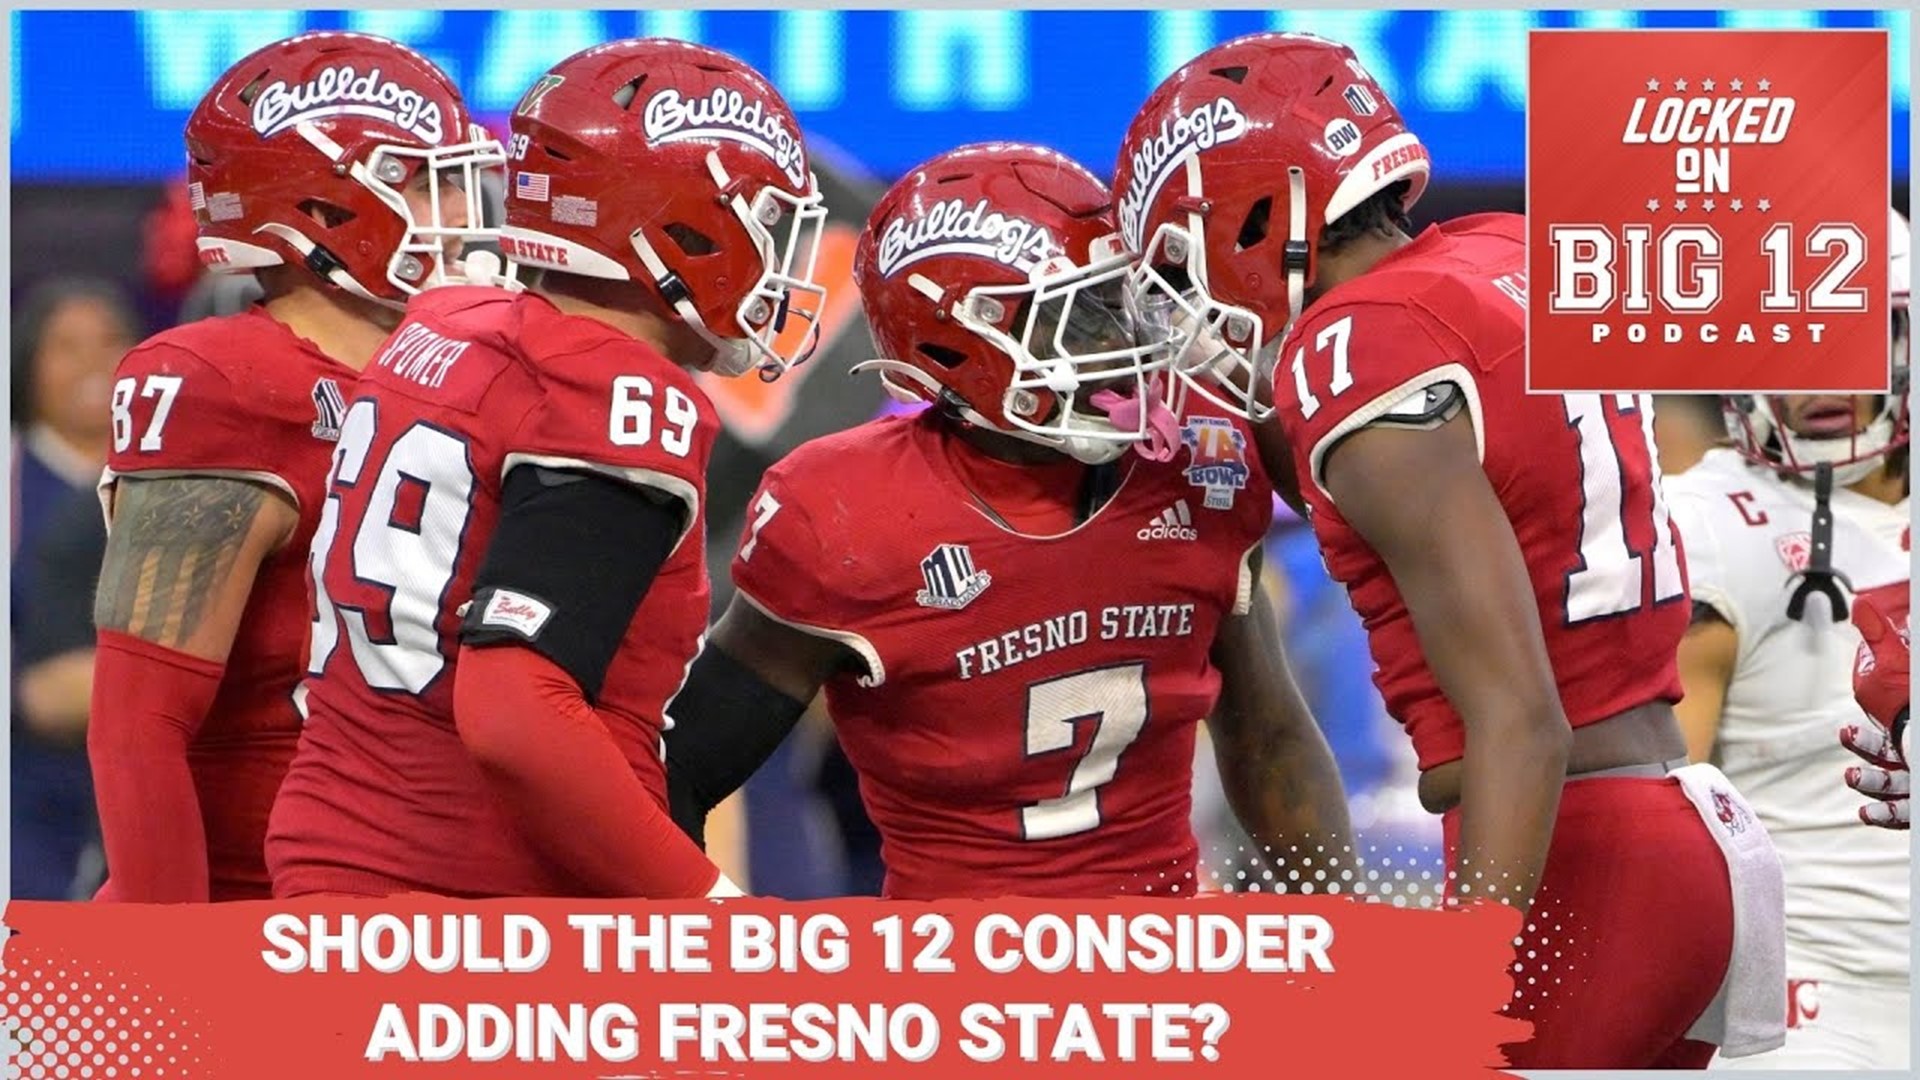 Should The Big 12 Add Fresno State Soon? + Big 12 Leads In March Madness $$$ Per School